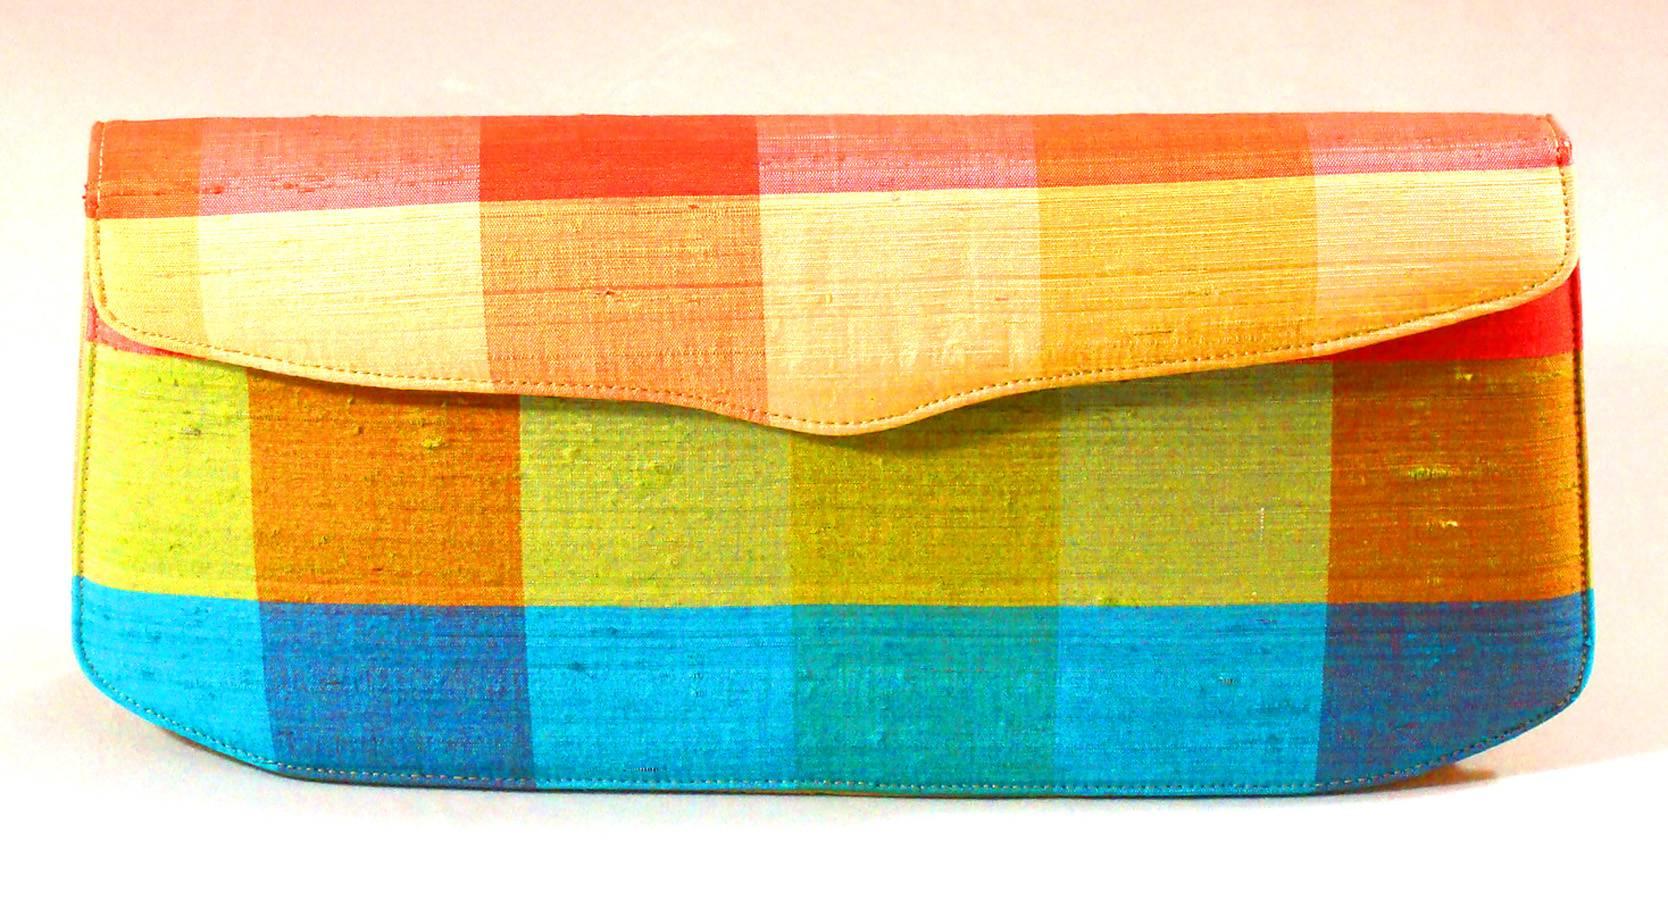 Here is a fun clutch for Spring and Summer.  It looks like a raw silk.  It is very well made with fine, tiny stitching  and a beige satin lining.  The East to West layout holds everything you need and it closes securely with its snap clasp. The